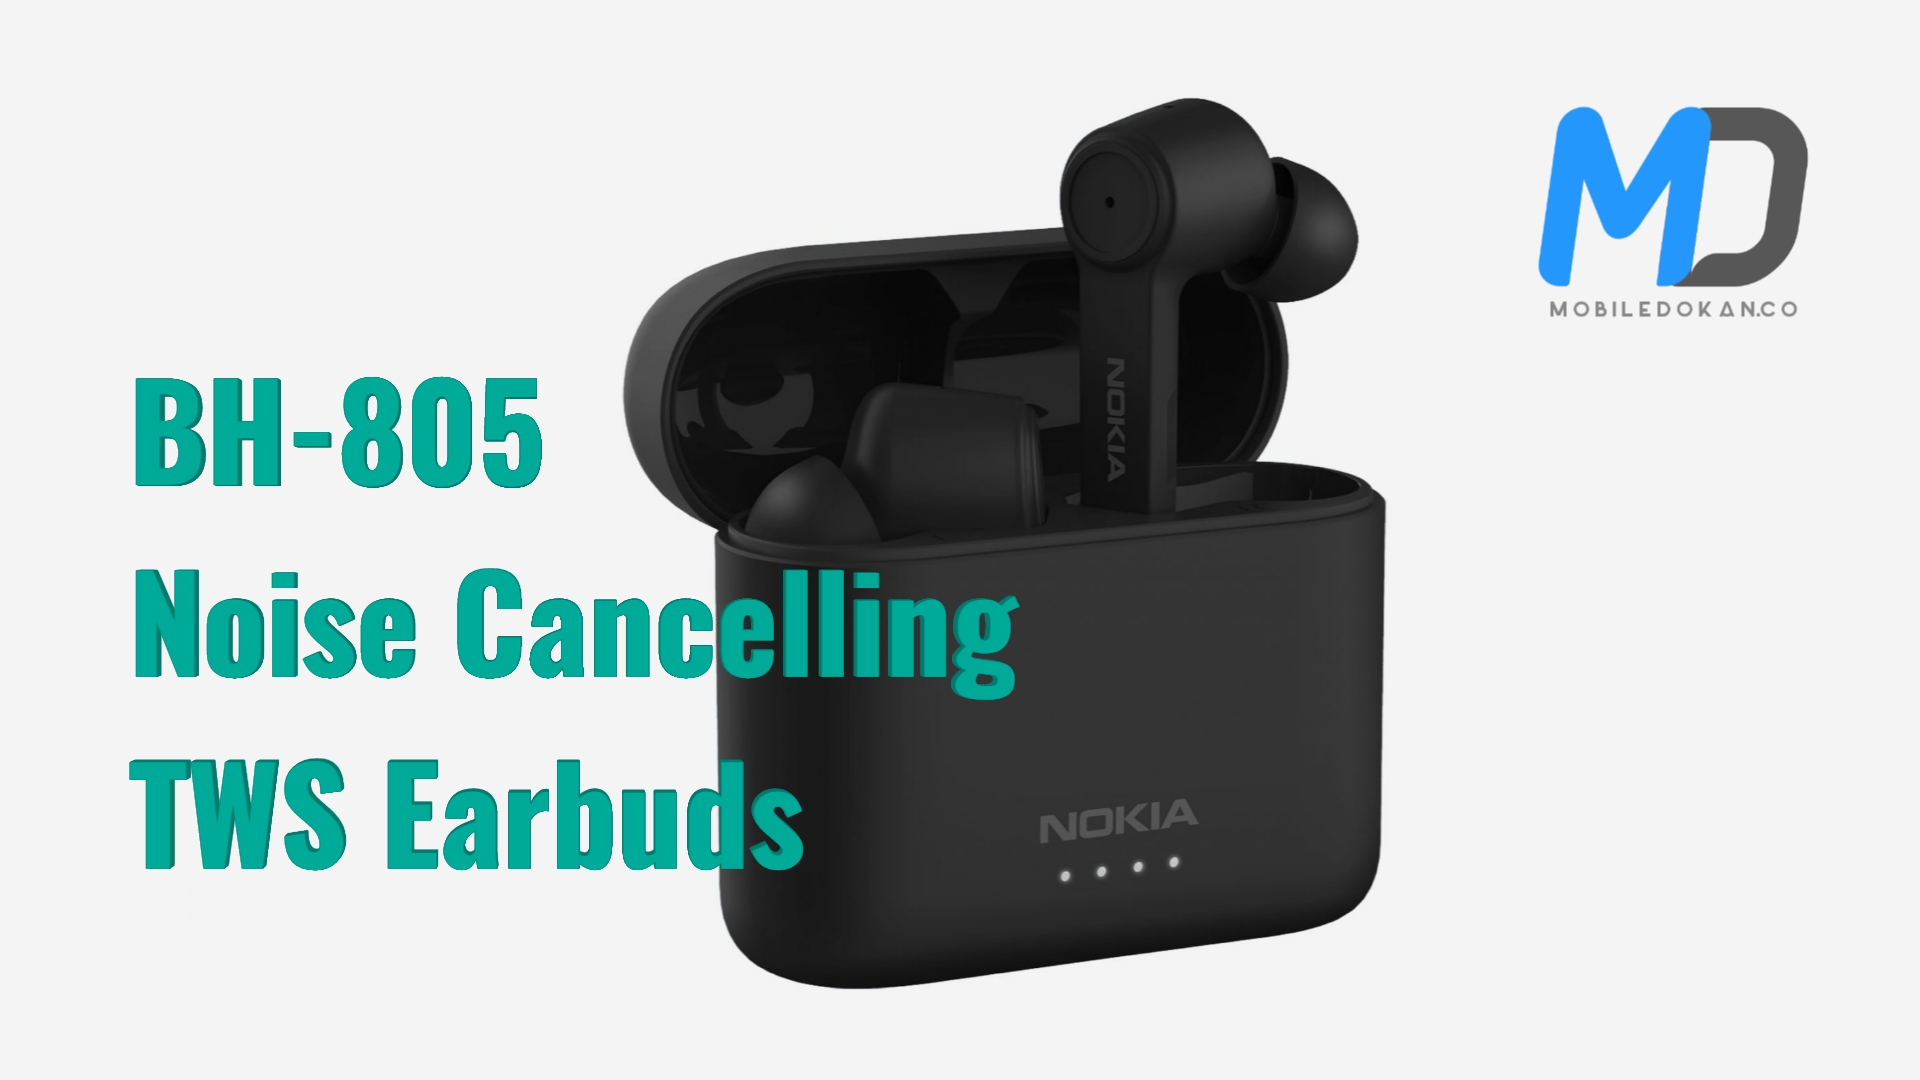 Nokia reveals the BH-805 Noise Cancelling TWS Earbuds in Europe